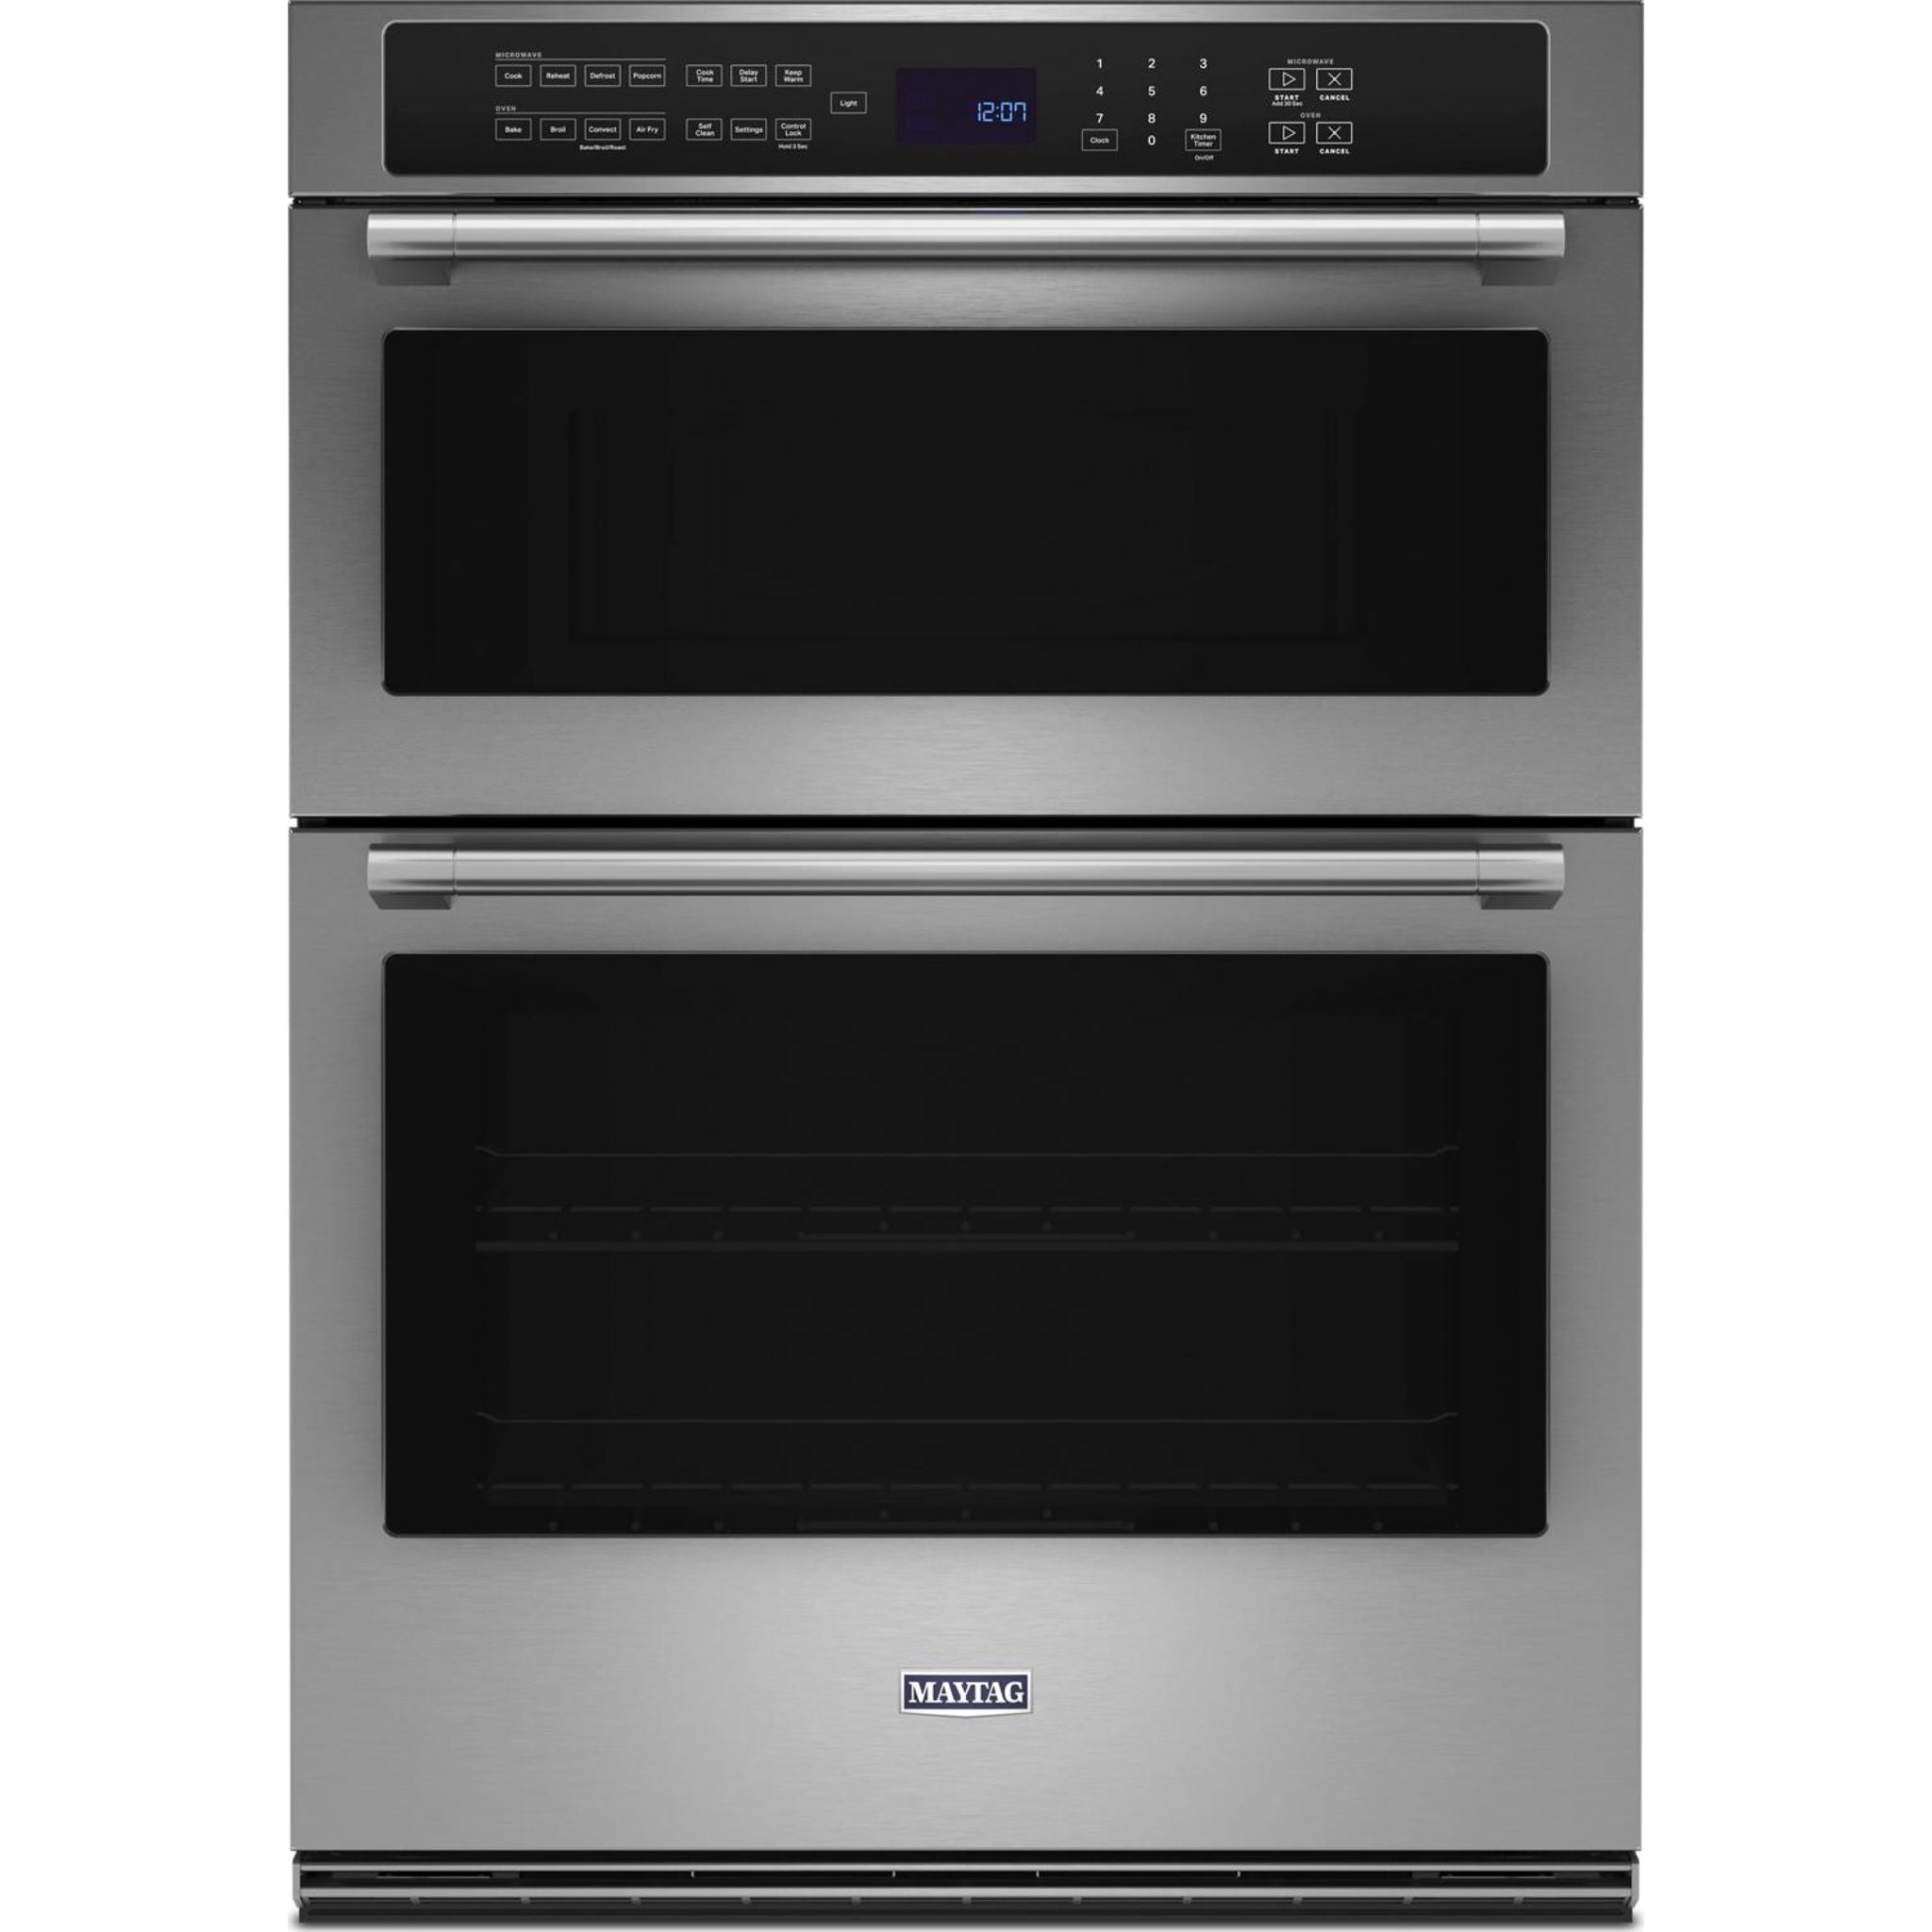 Maytag, Maytag 30" True Convection Wall Oven (MOEC6030LZ) - Fingerprint Resistant Stainless Steel